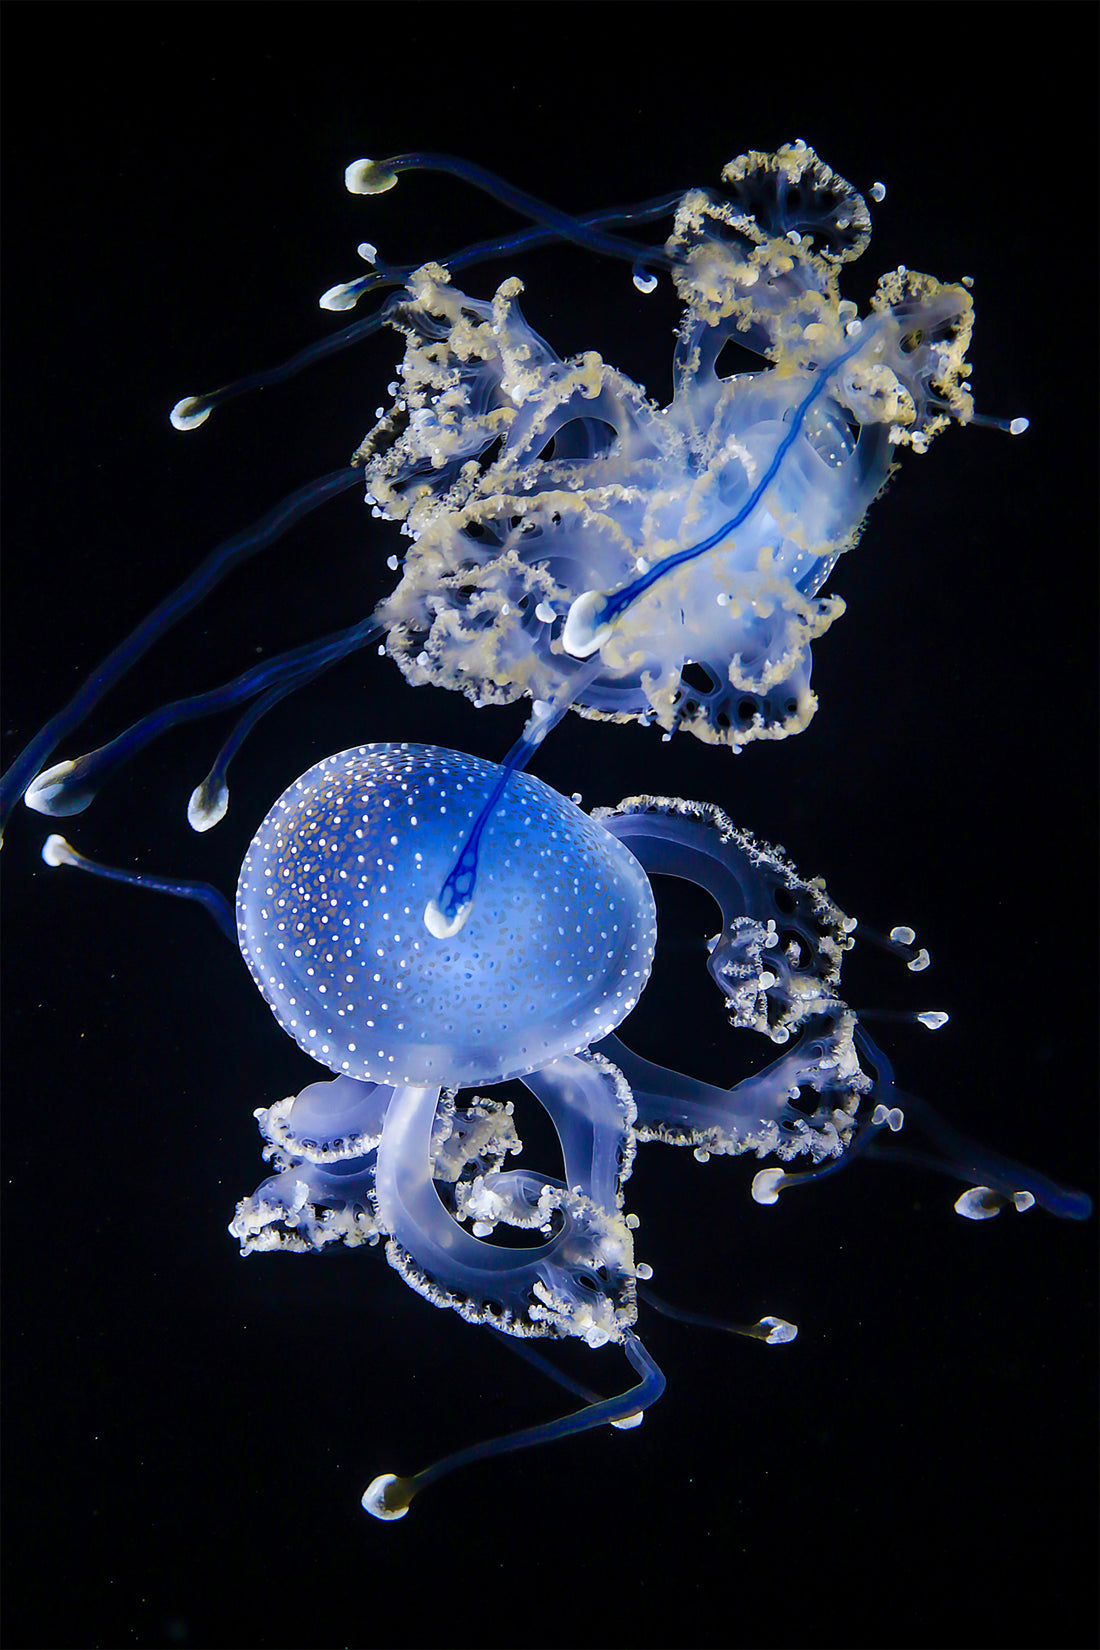 White-Spotted Jellyfish